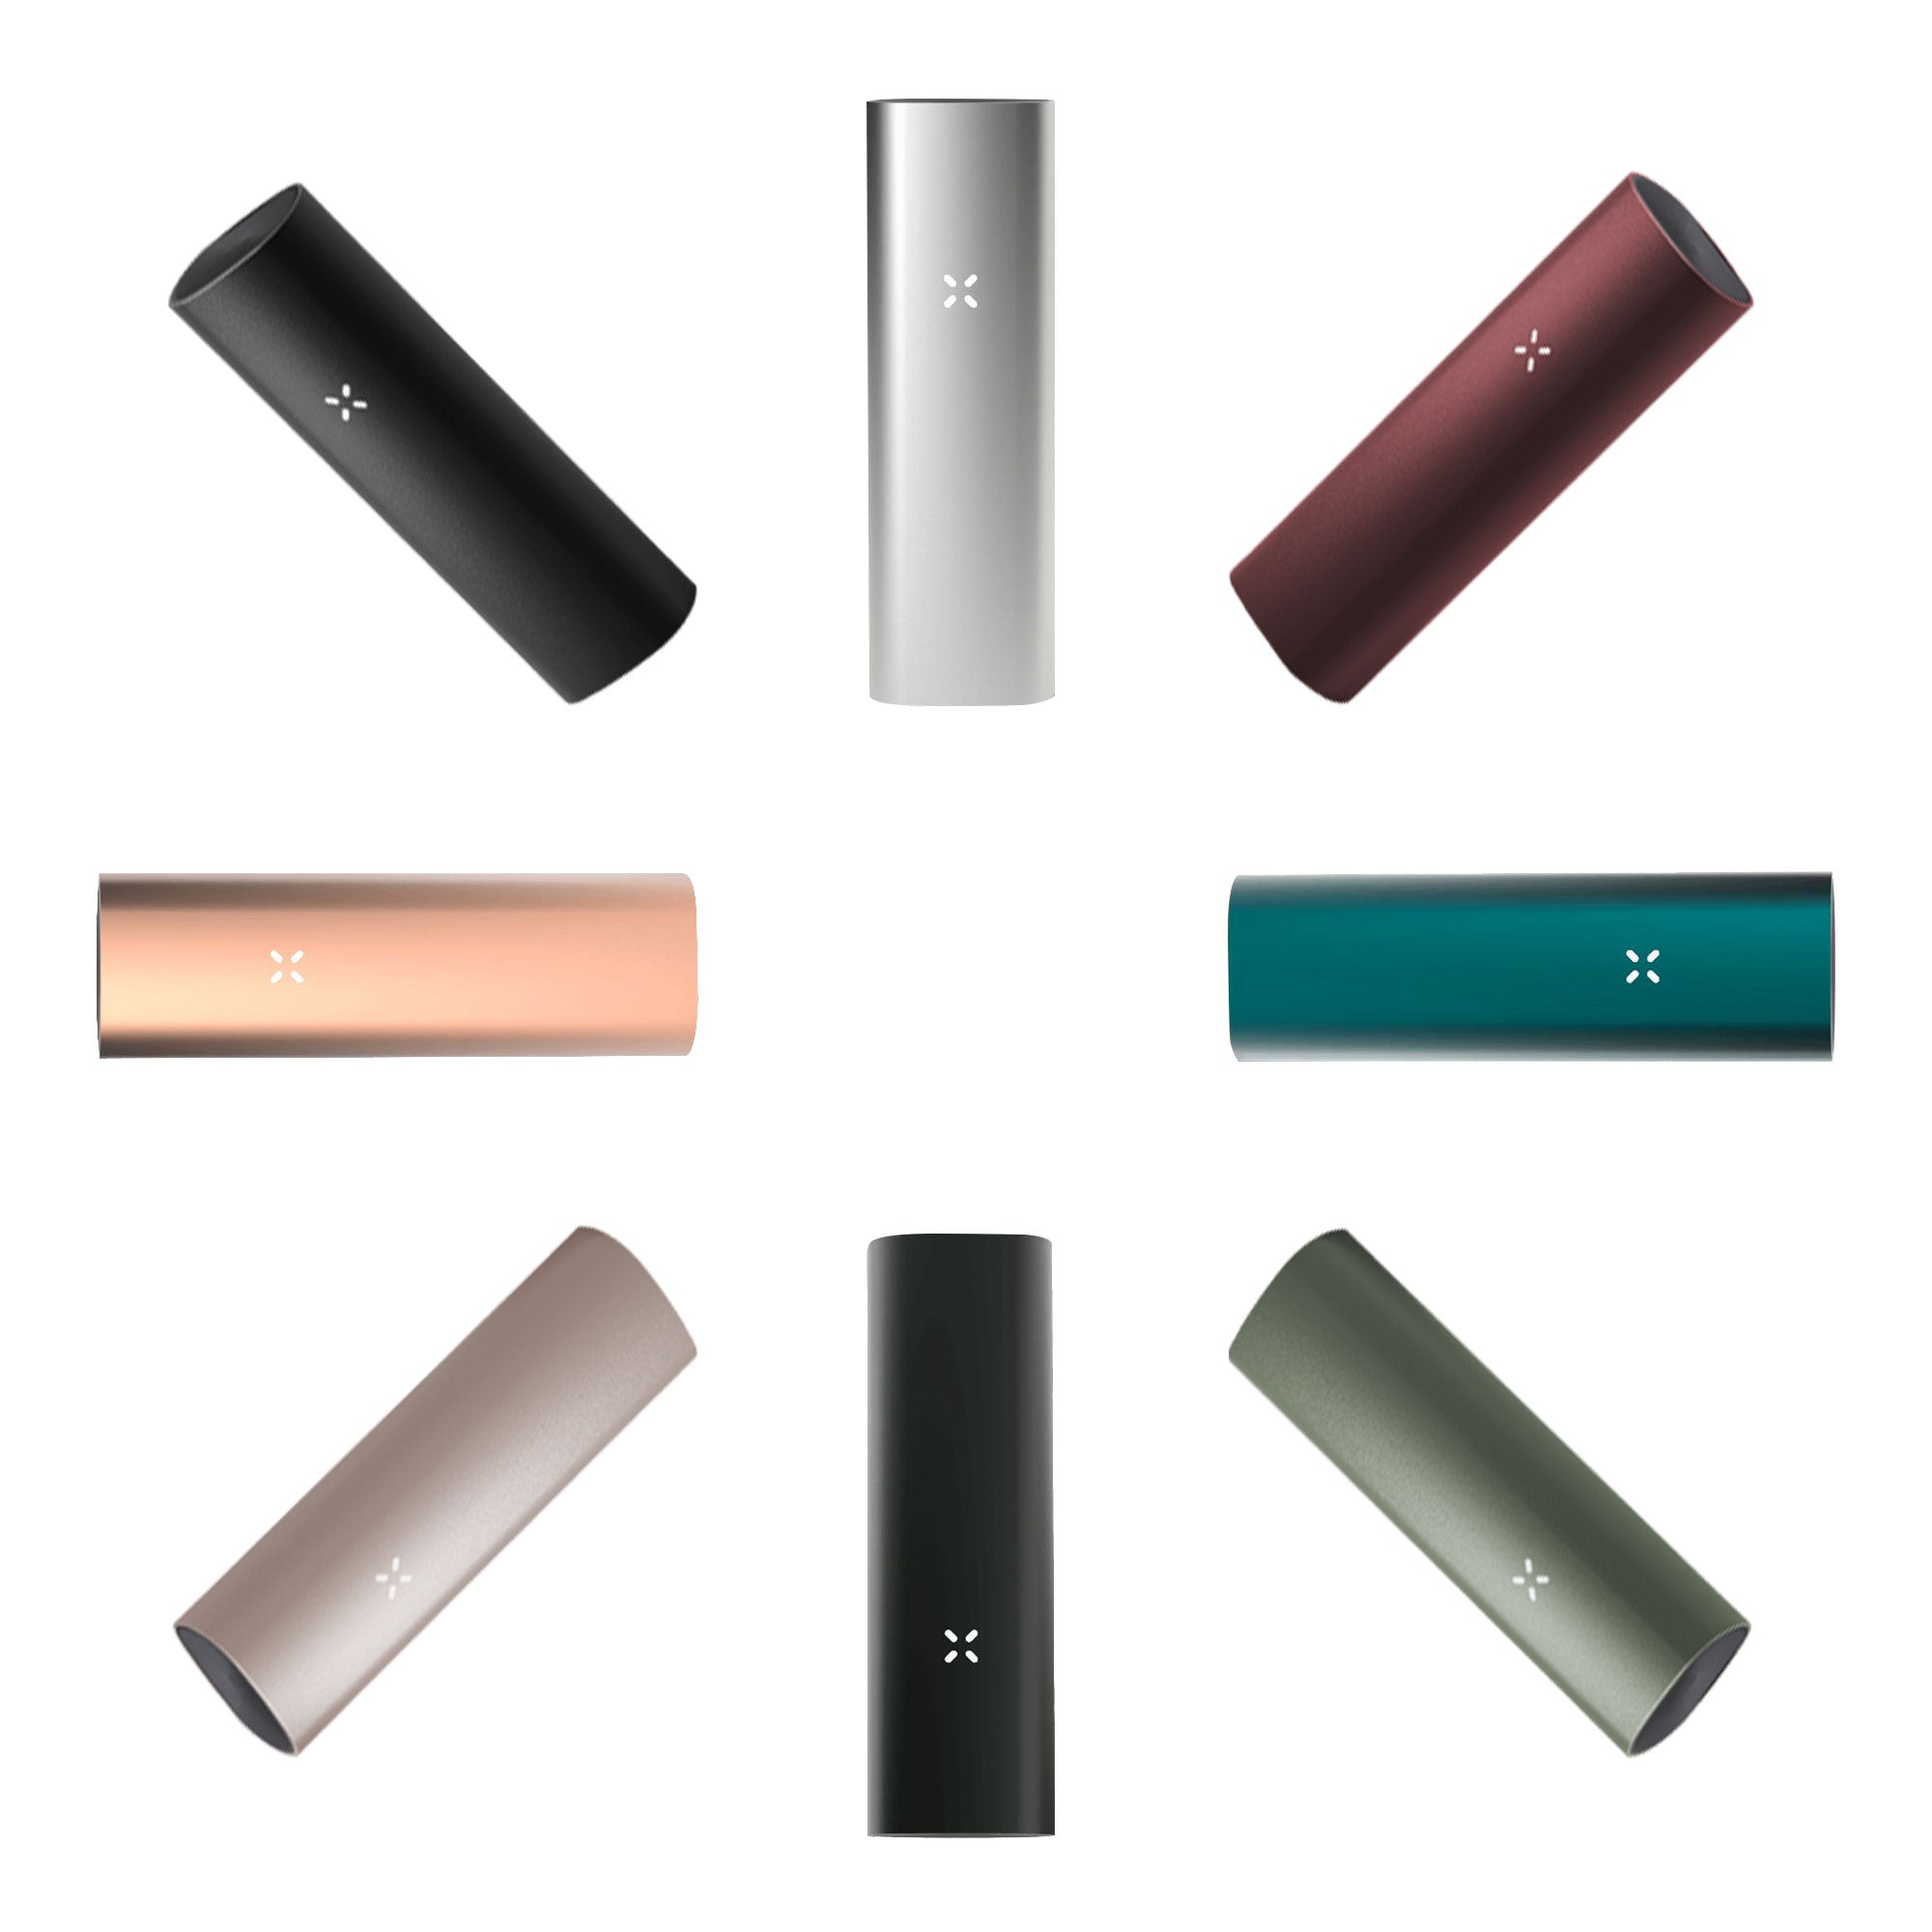 Pax 3 All-in-one Vaporizer - Complete Kit